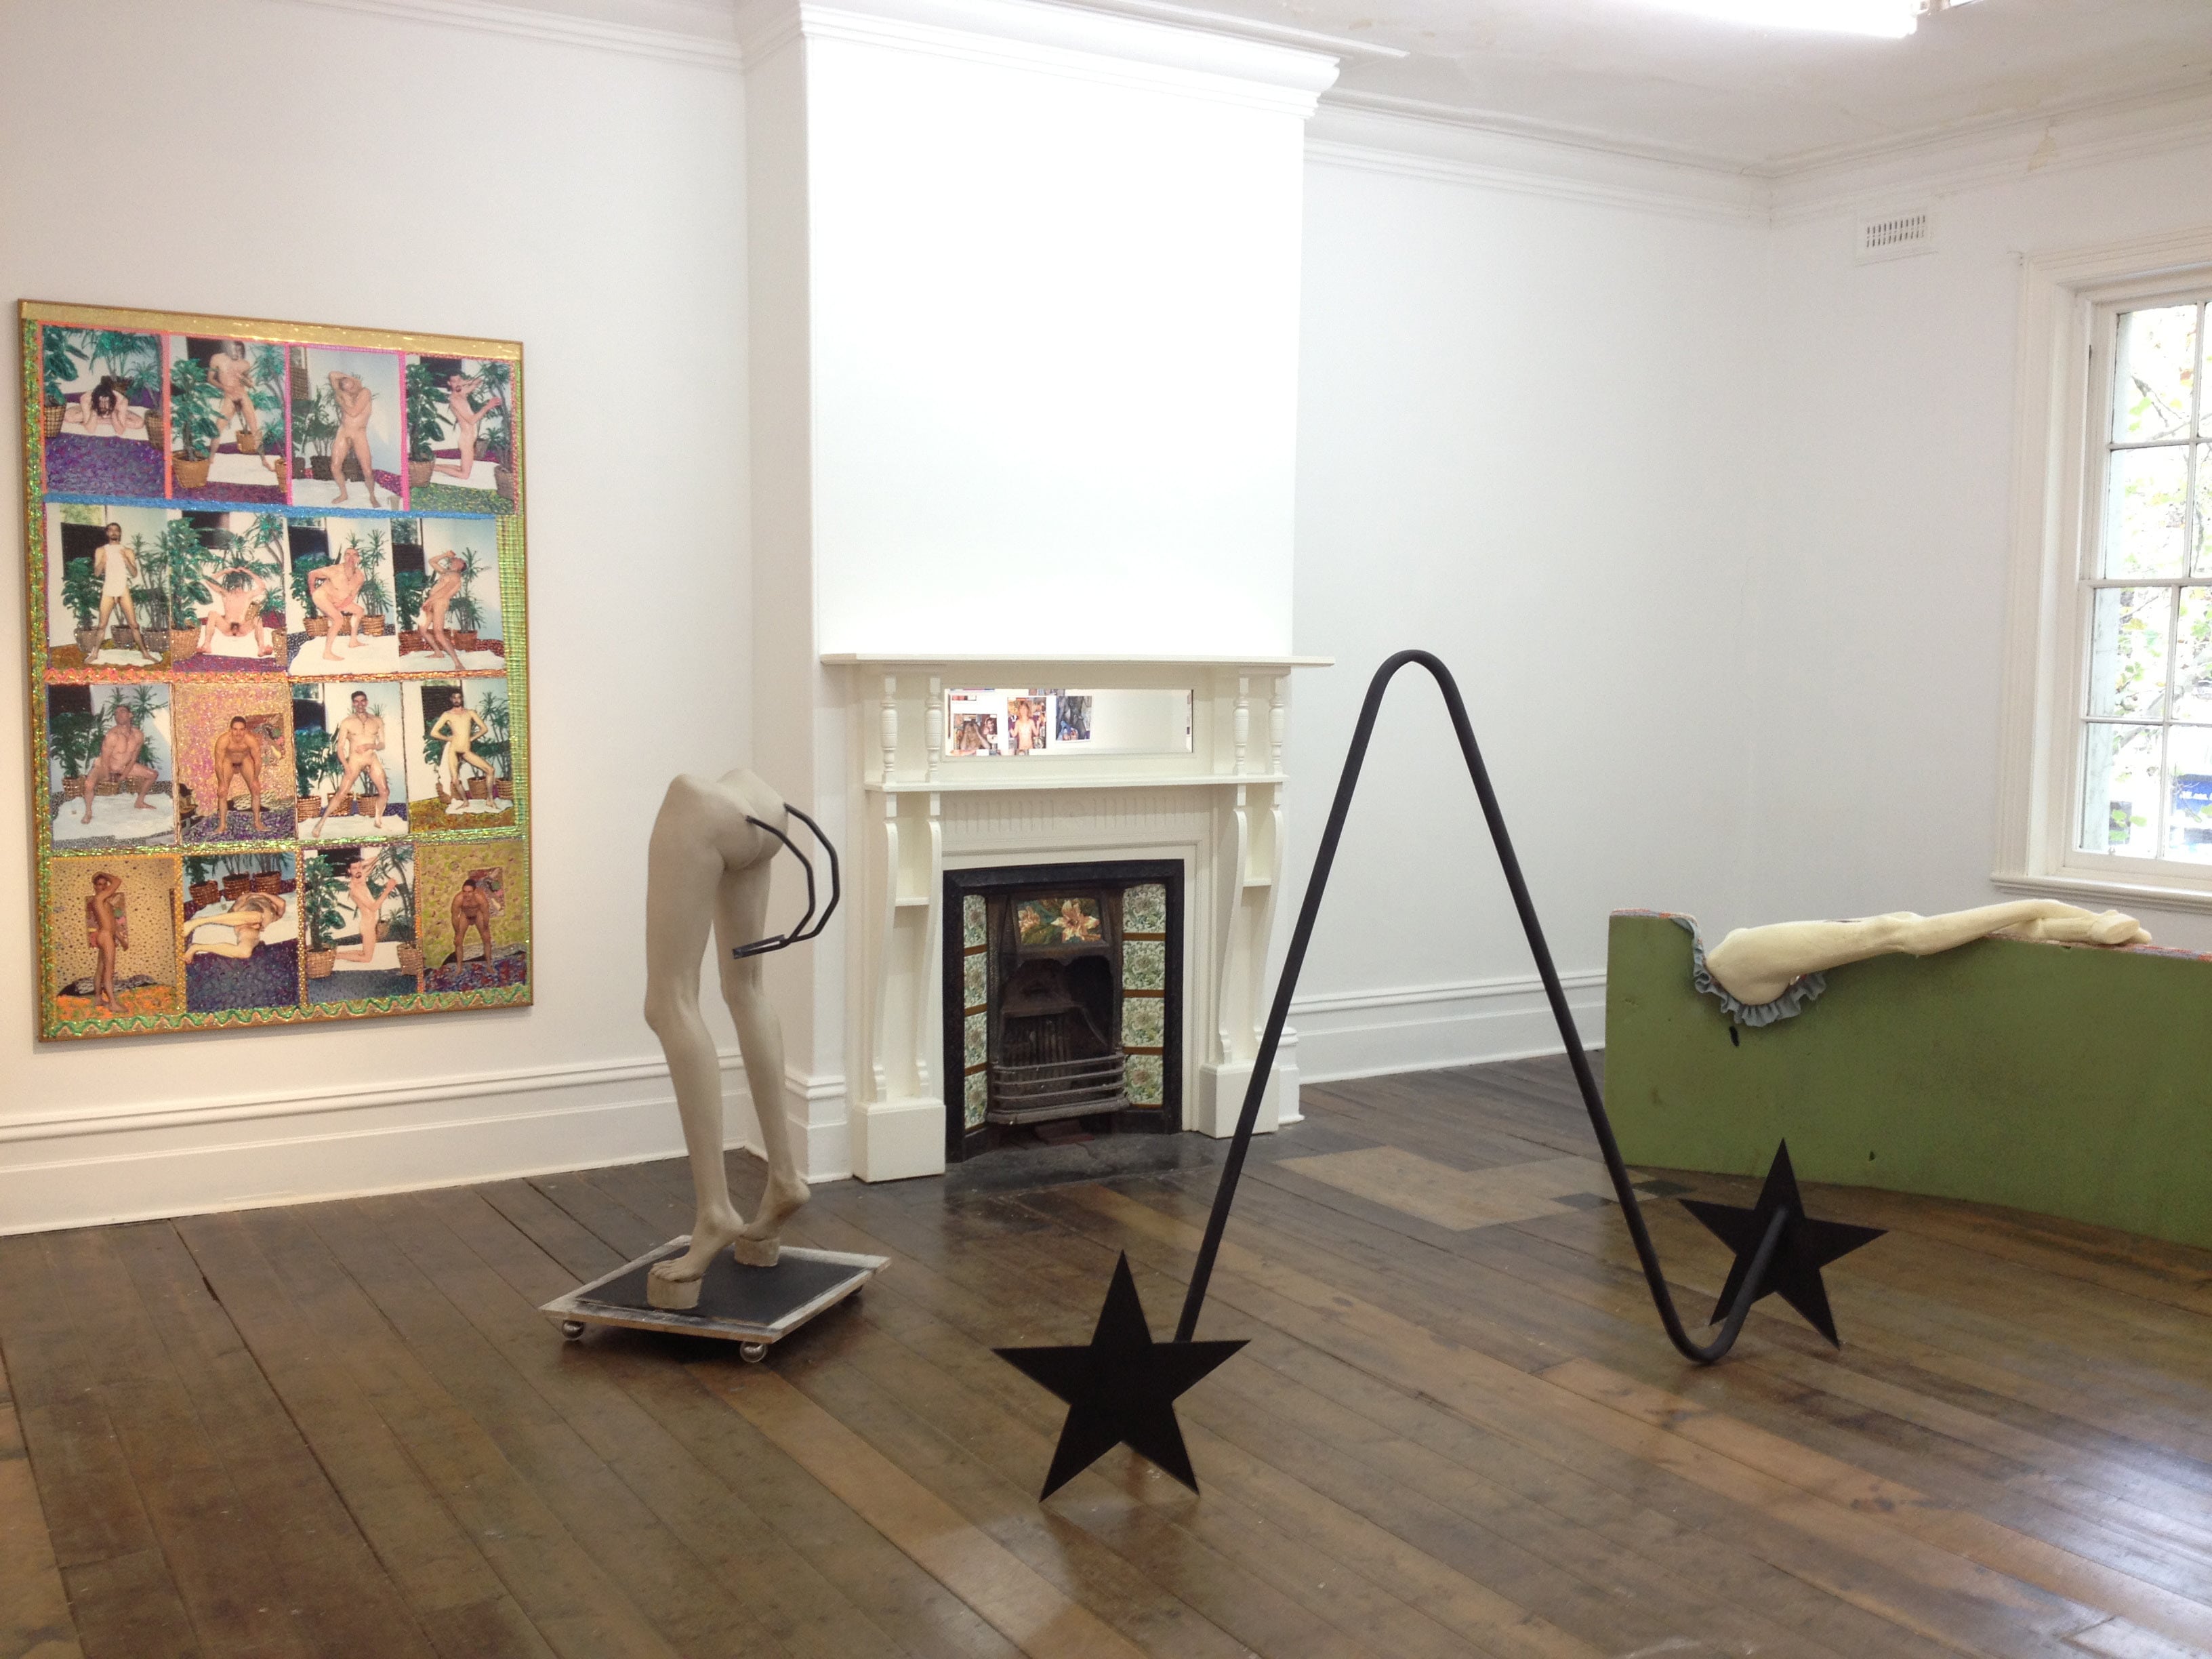 <em>Like Mike</em>, 2013, installation view featuring works by Pat Larter and Claire Lambe, image courtesy Sarah Scout, Melbourne, photograph: Phebe Schmidt